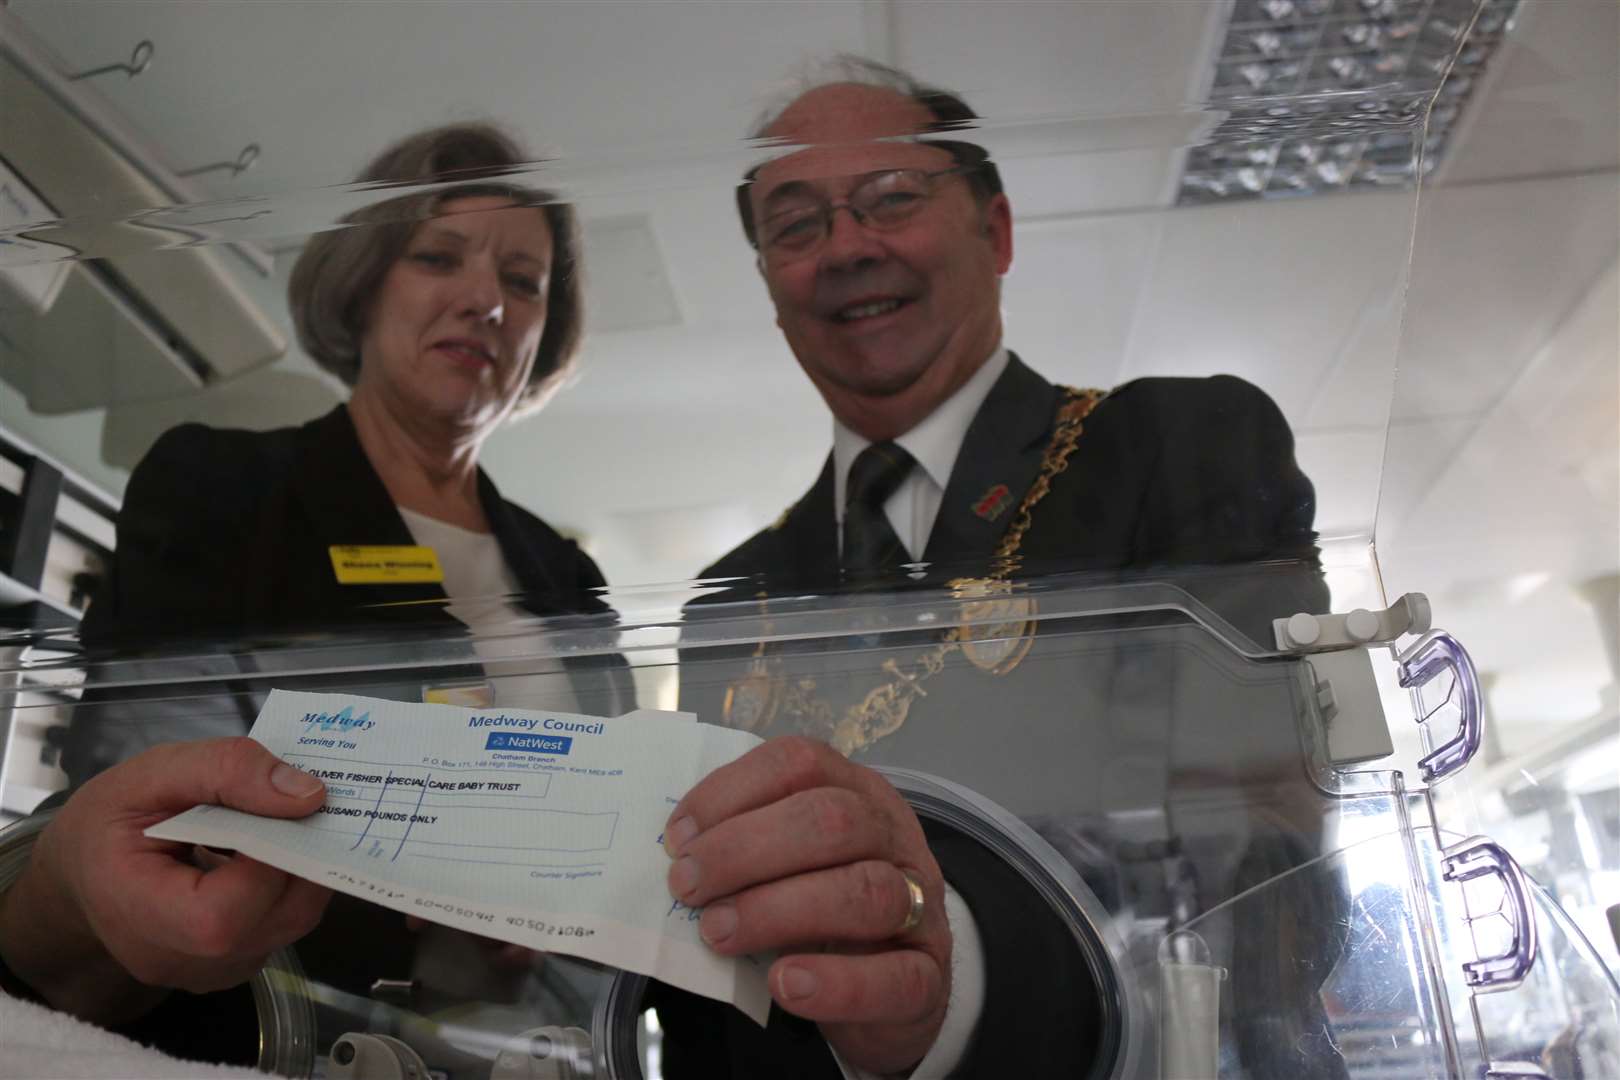 Mayor of Medway Cllr Barry Kemp giving a cheque to the Neo-natal unit, Medway Maritime Hospital